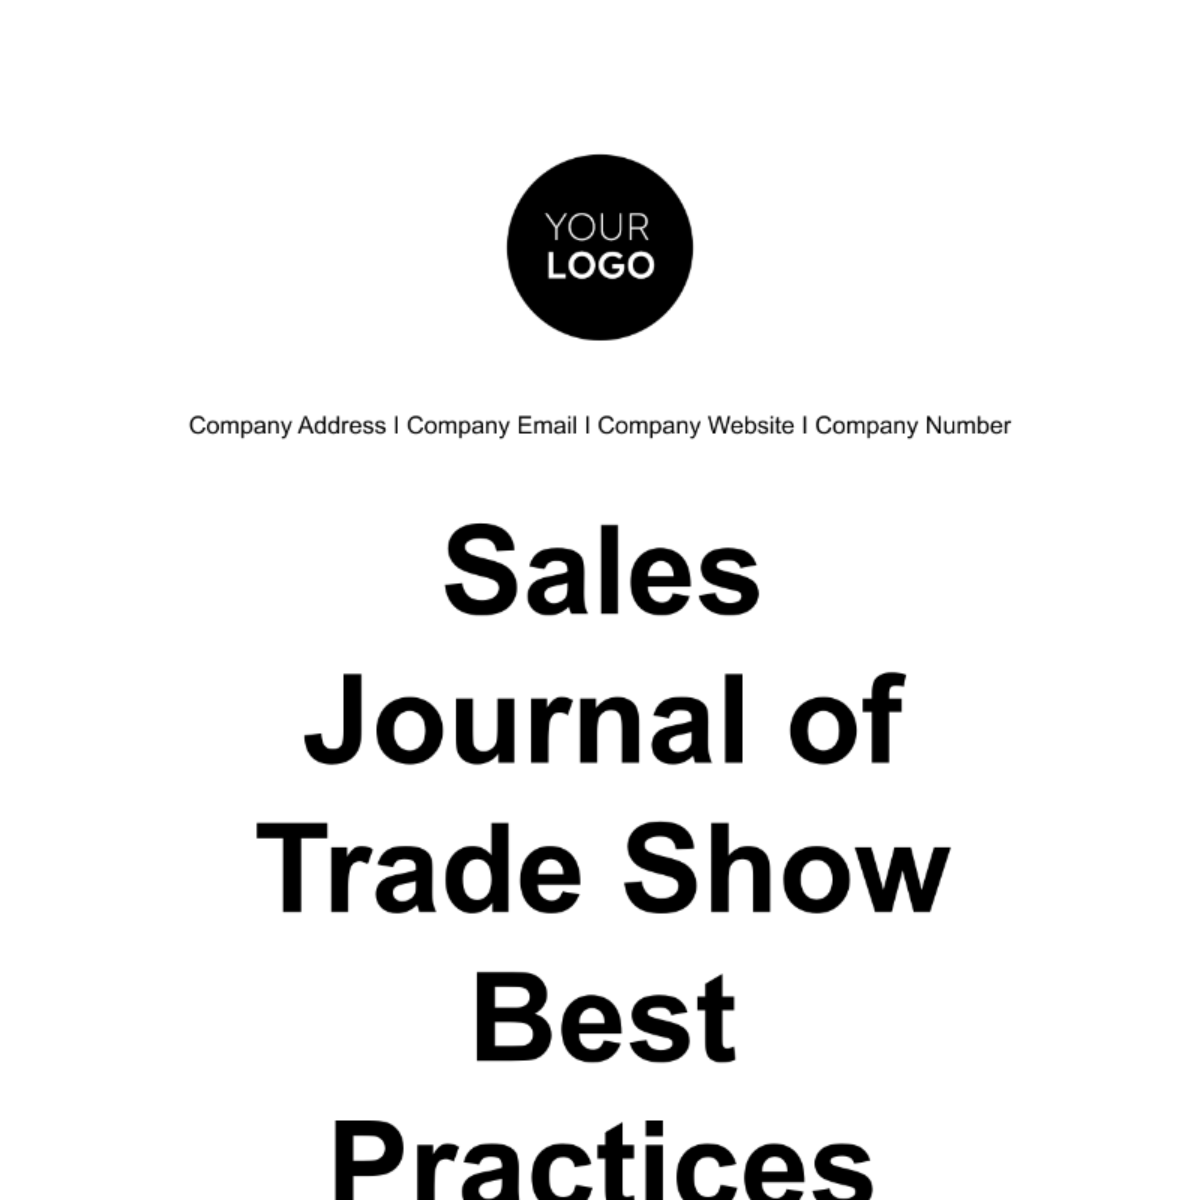 Free Sales Journal of Trade Show Best Practices Template